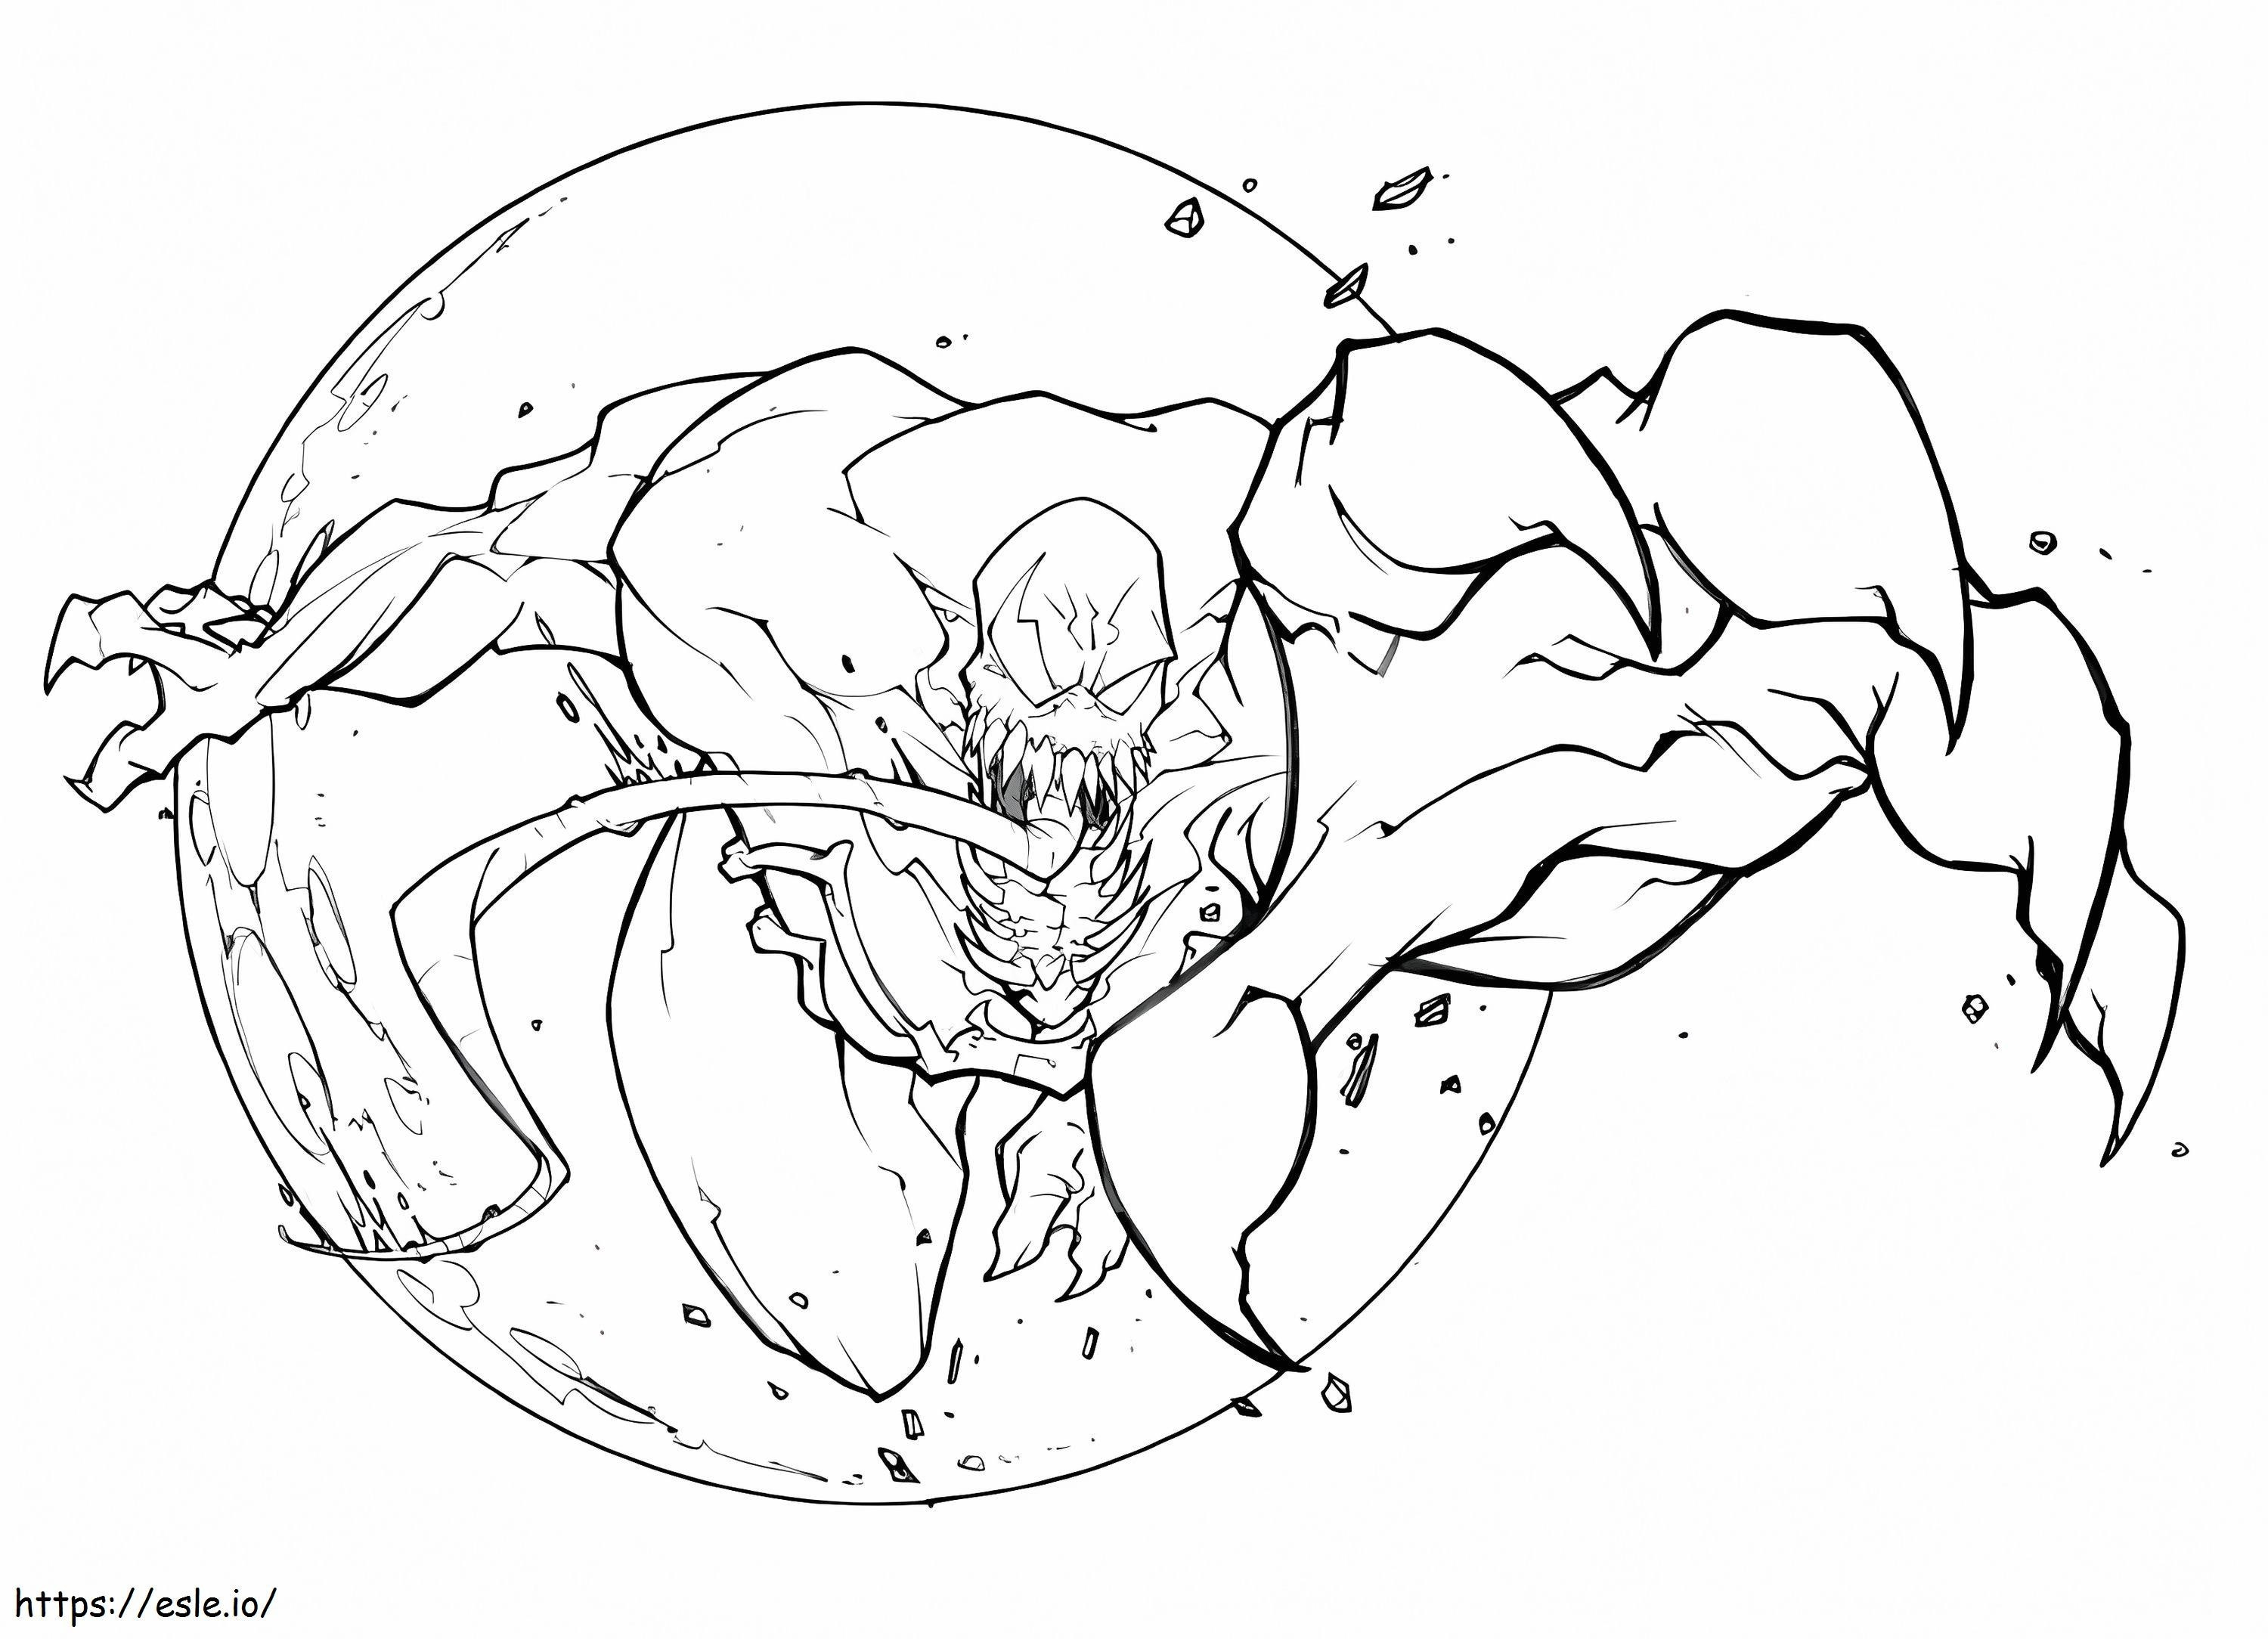 Venom Is Anry coloring page